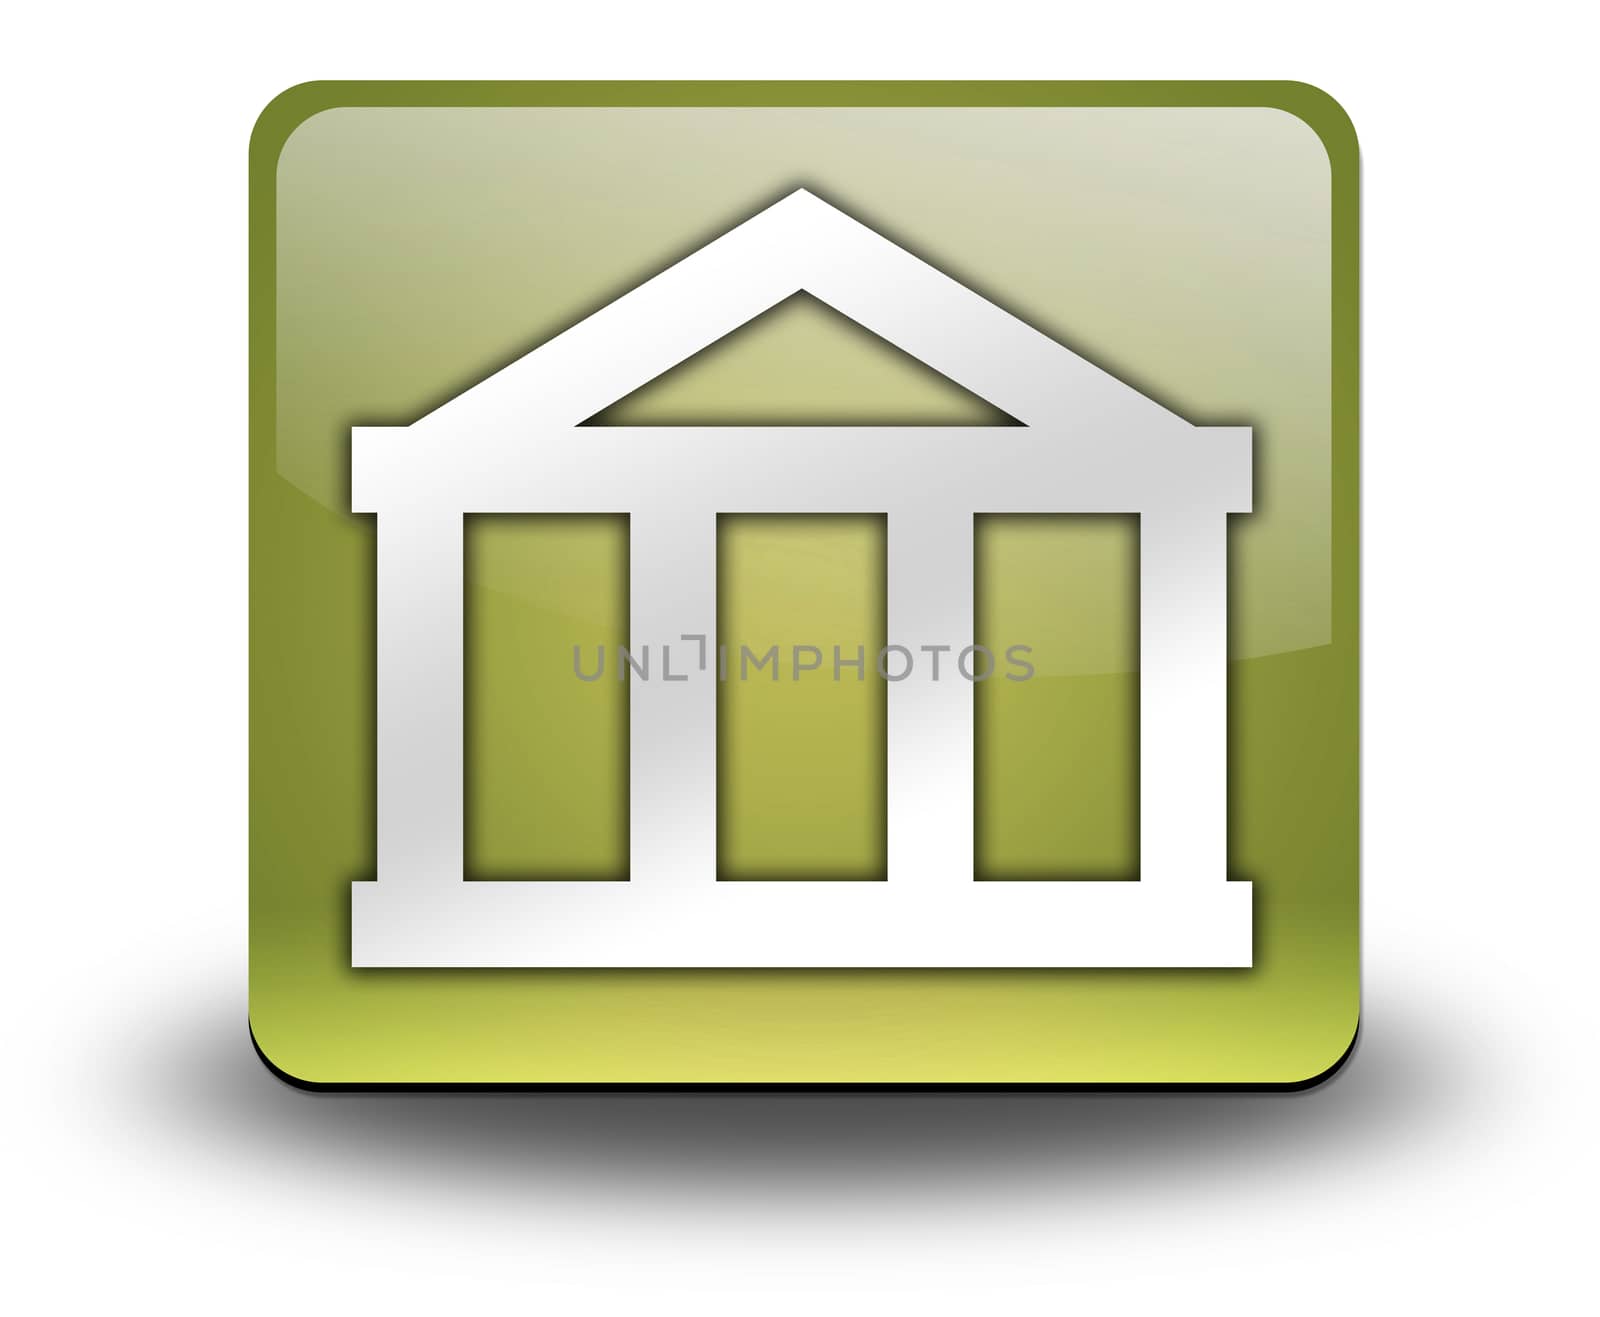 Icon, Button, Pictogram with Bank symbol